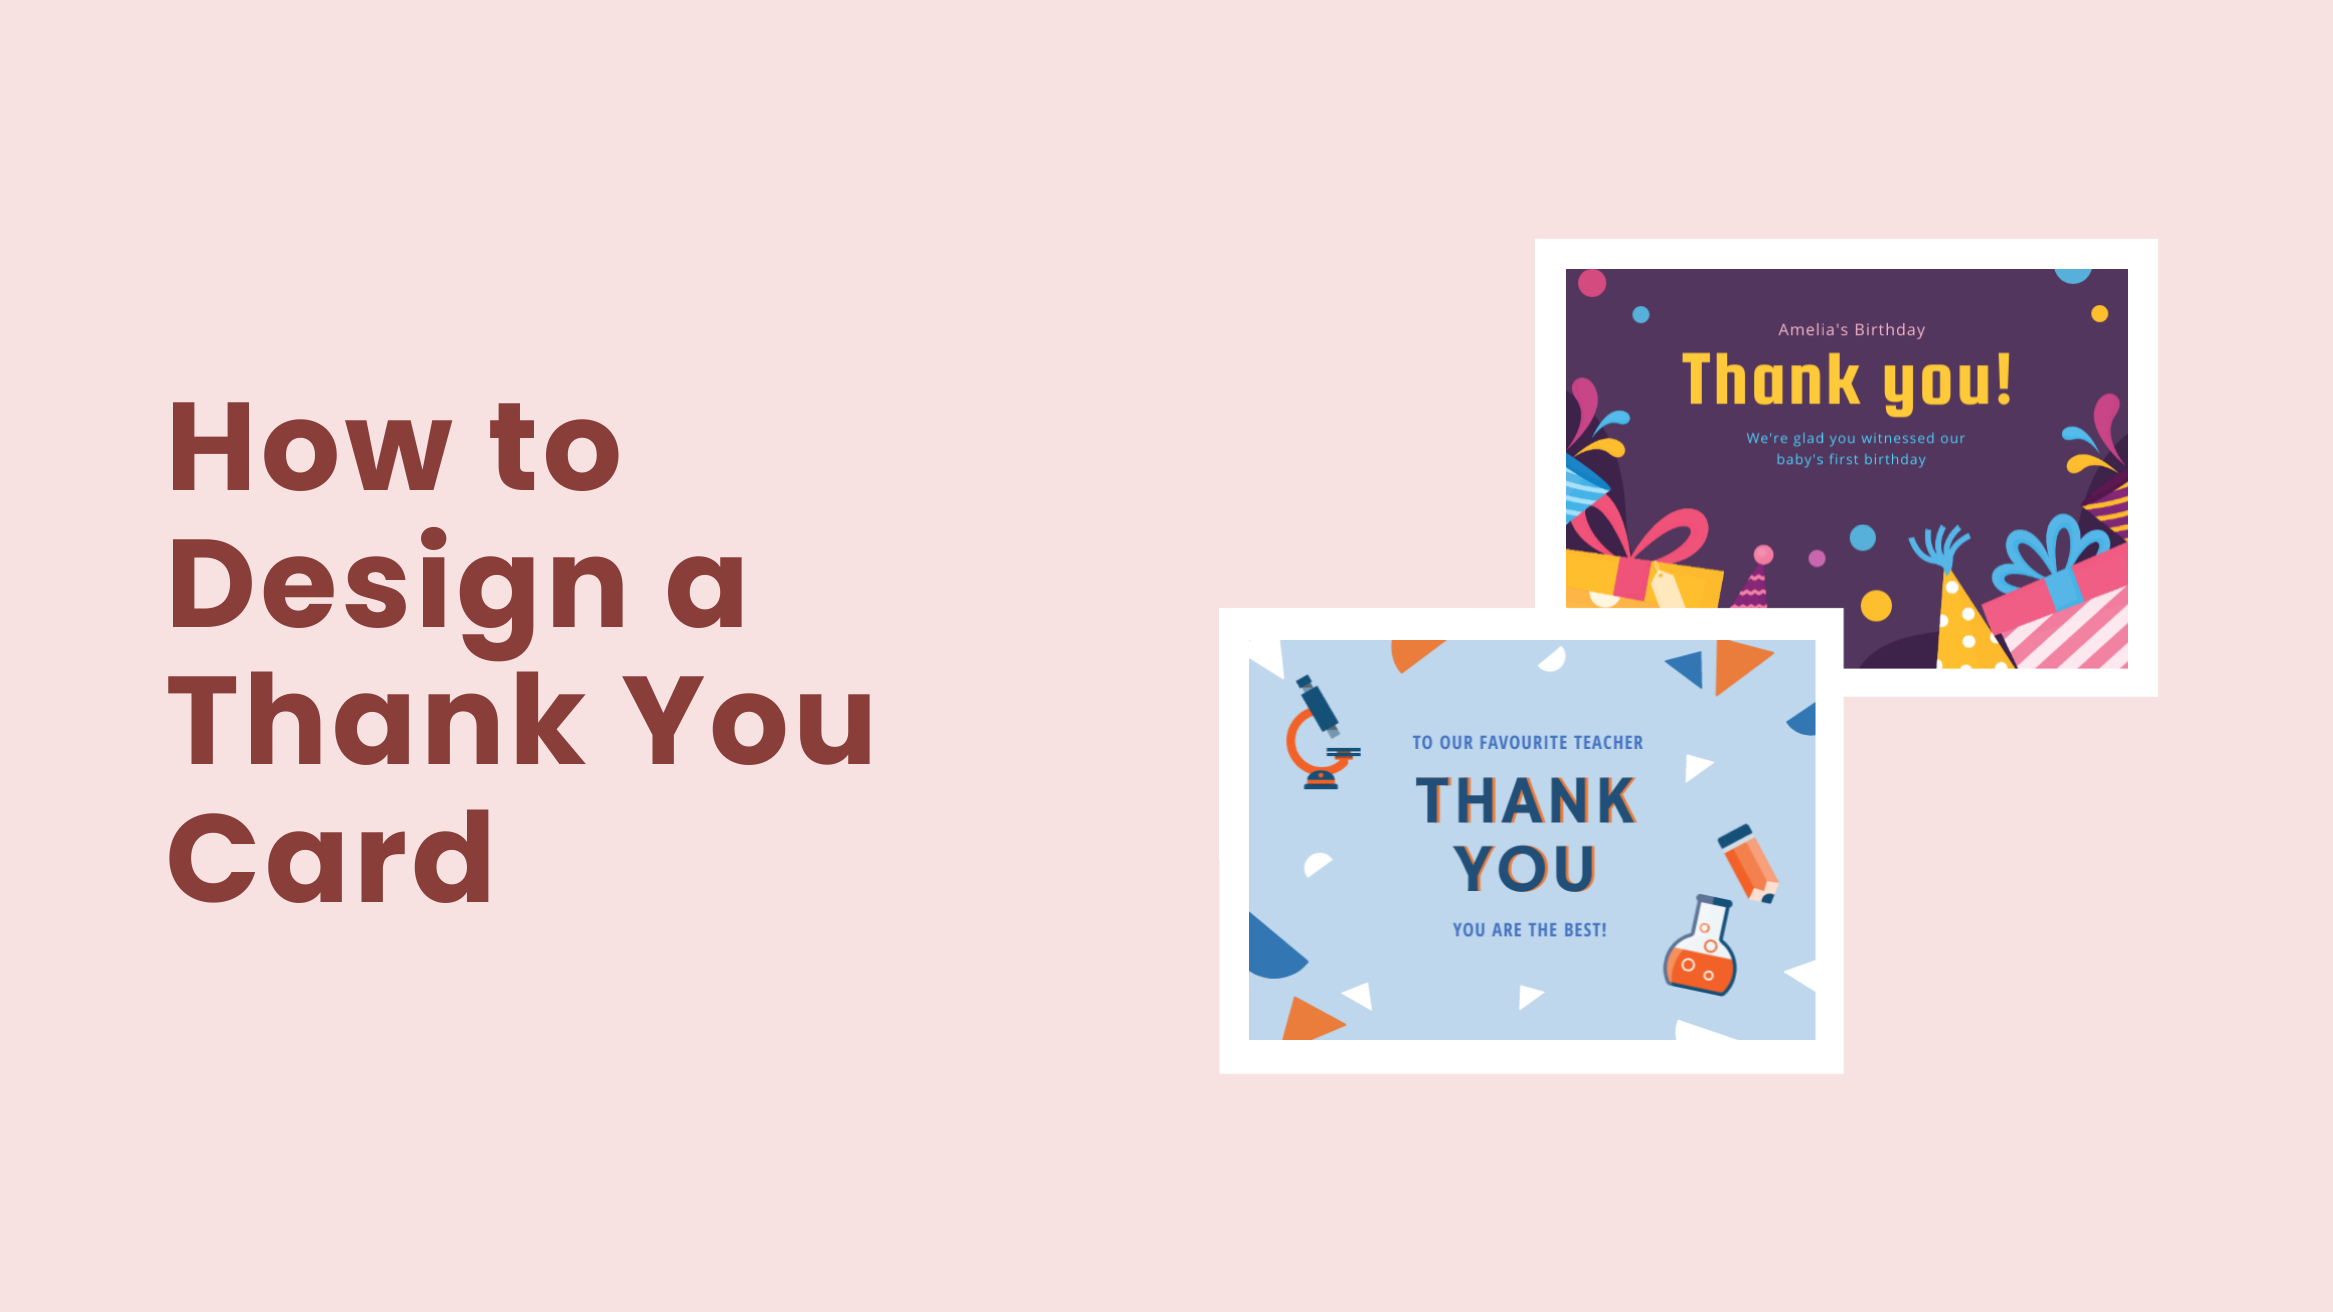 How to Design a Thank You Card